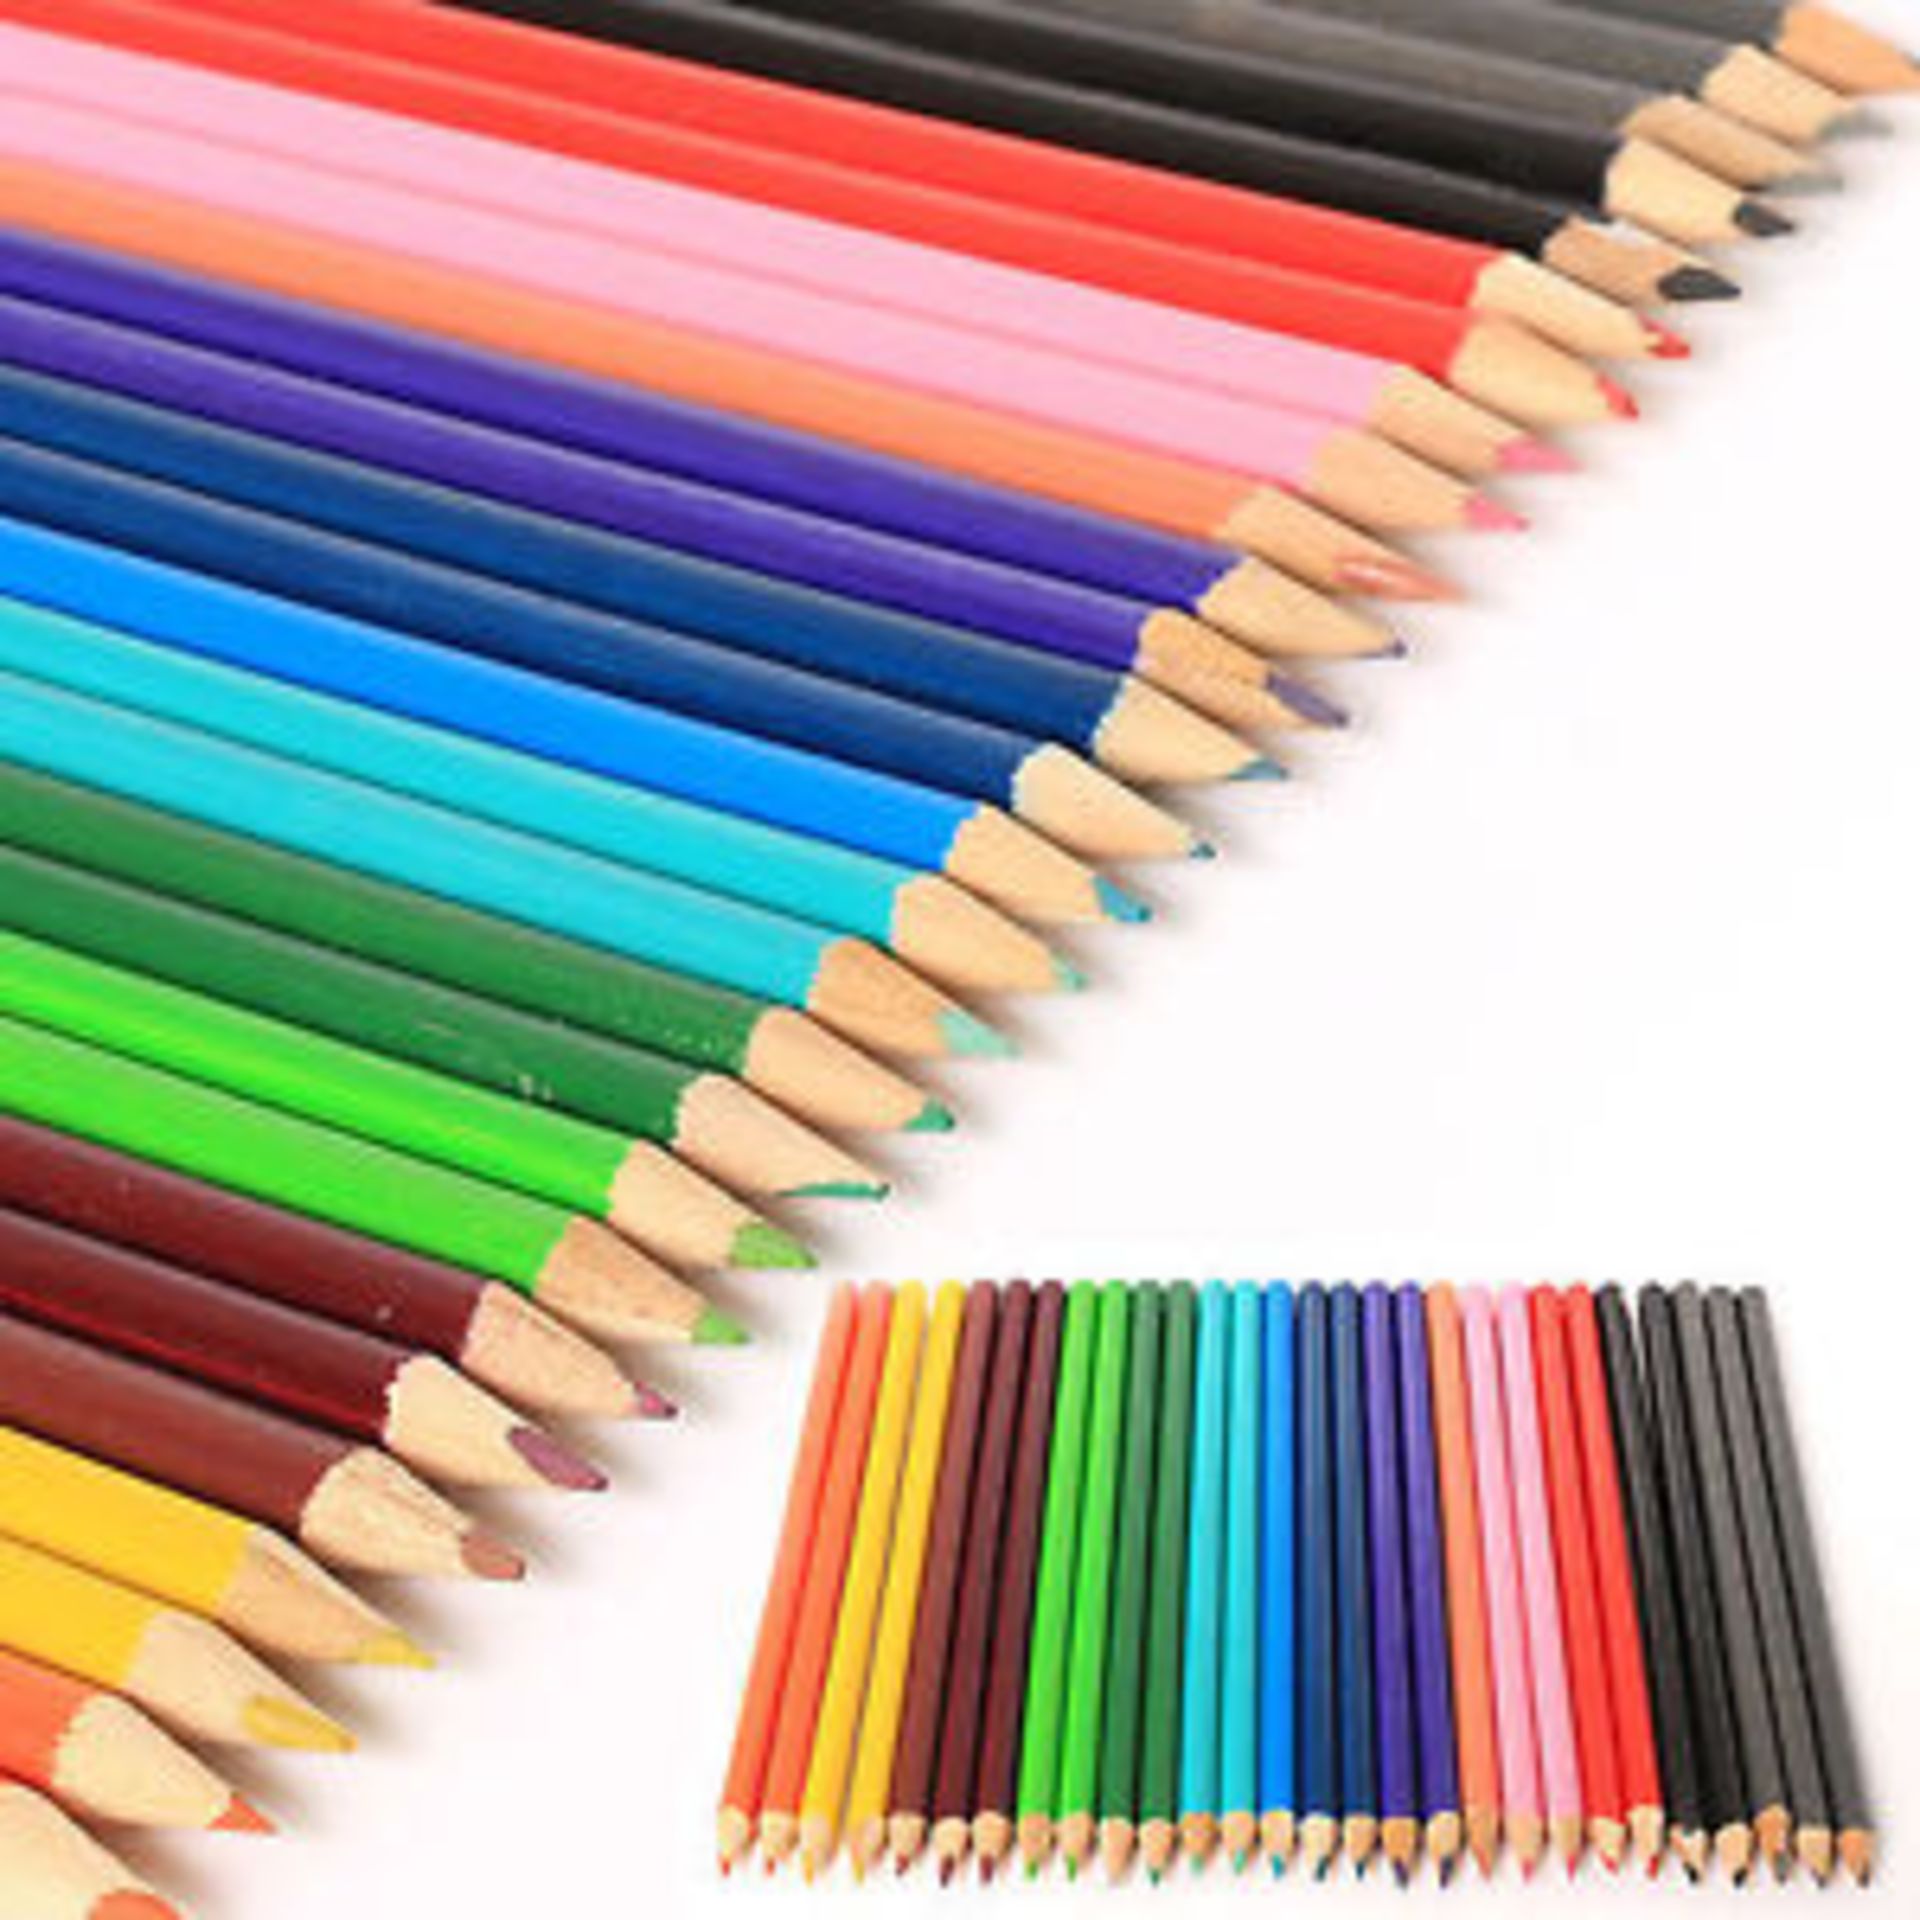 V *TRADE QTY* Brand New 30 Pack Professional Colouring Pencils - Artist Quality X 4 YOUR BID PRICE - Image 2 of 2